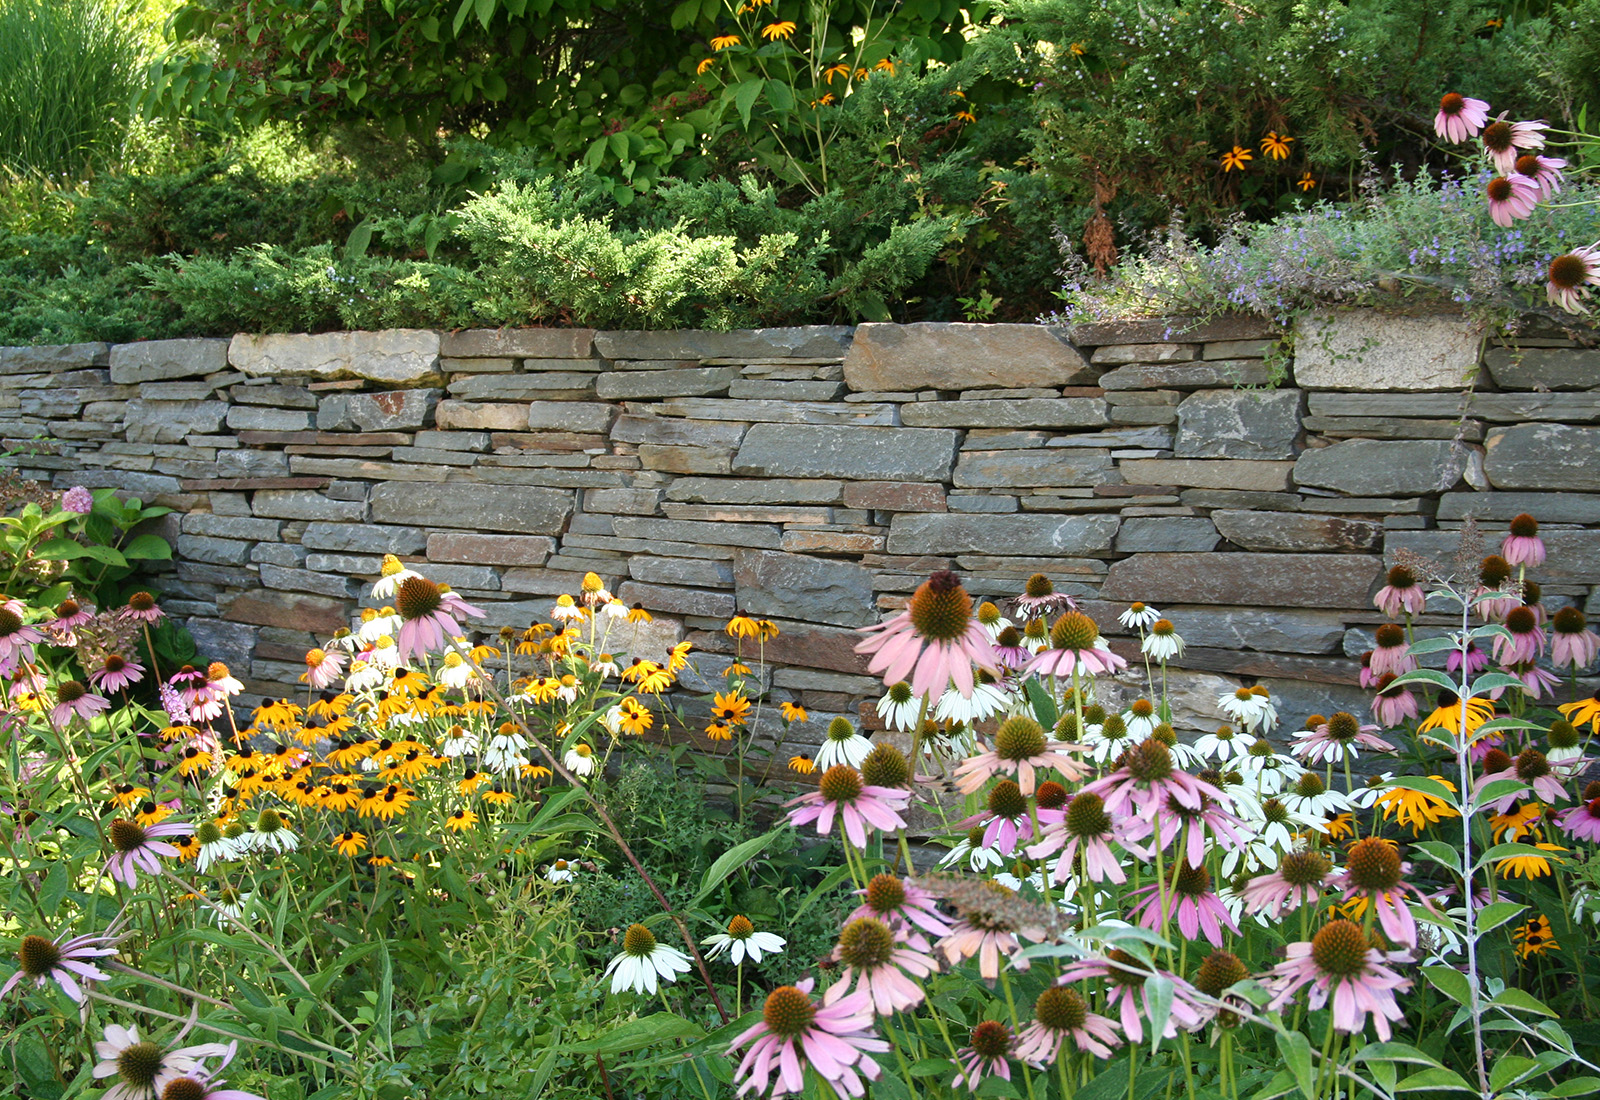 Stacked stone retaining wall and perennial garden.